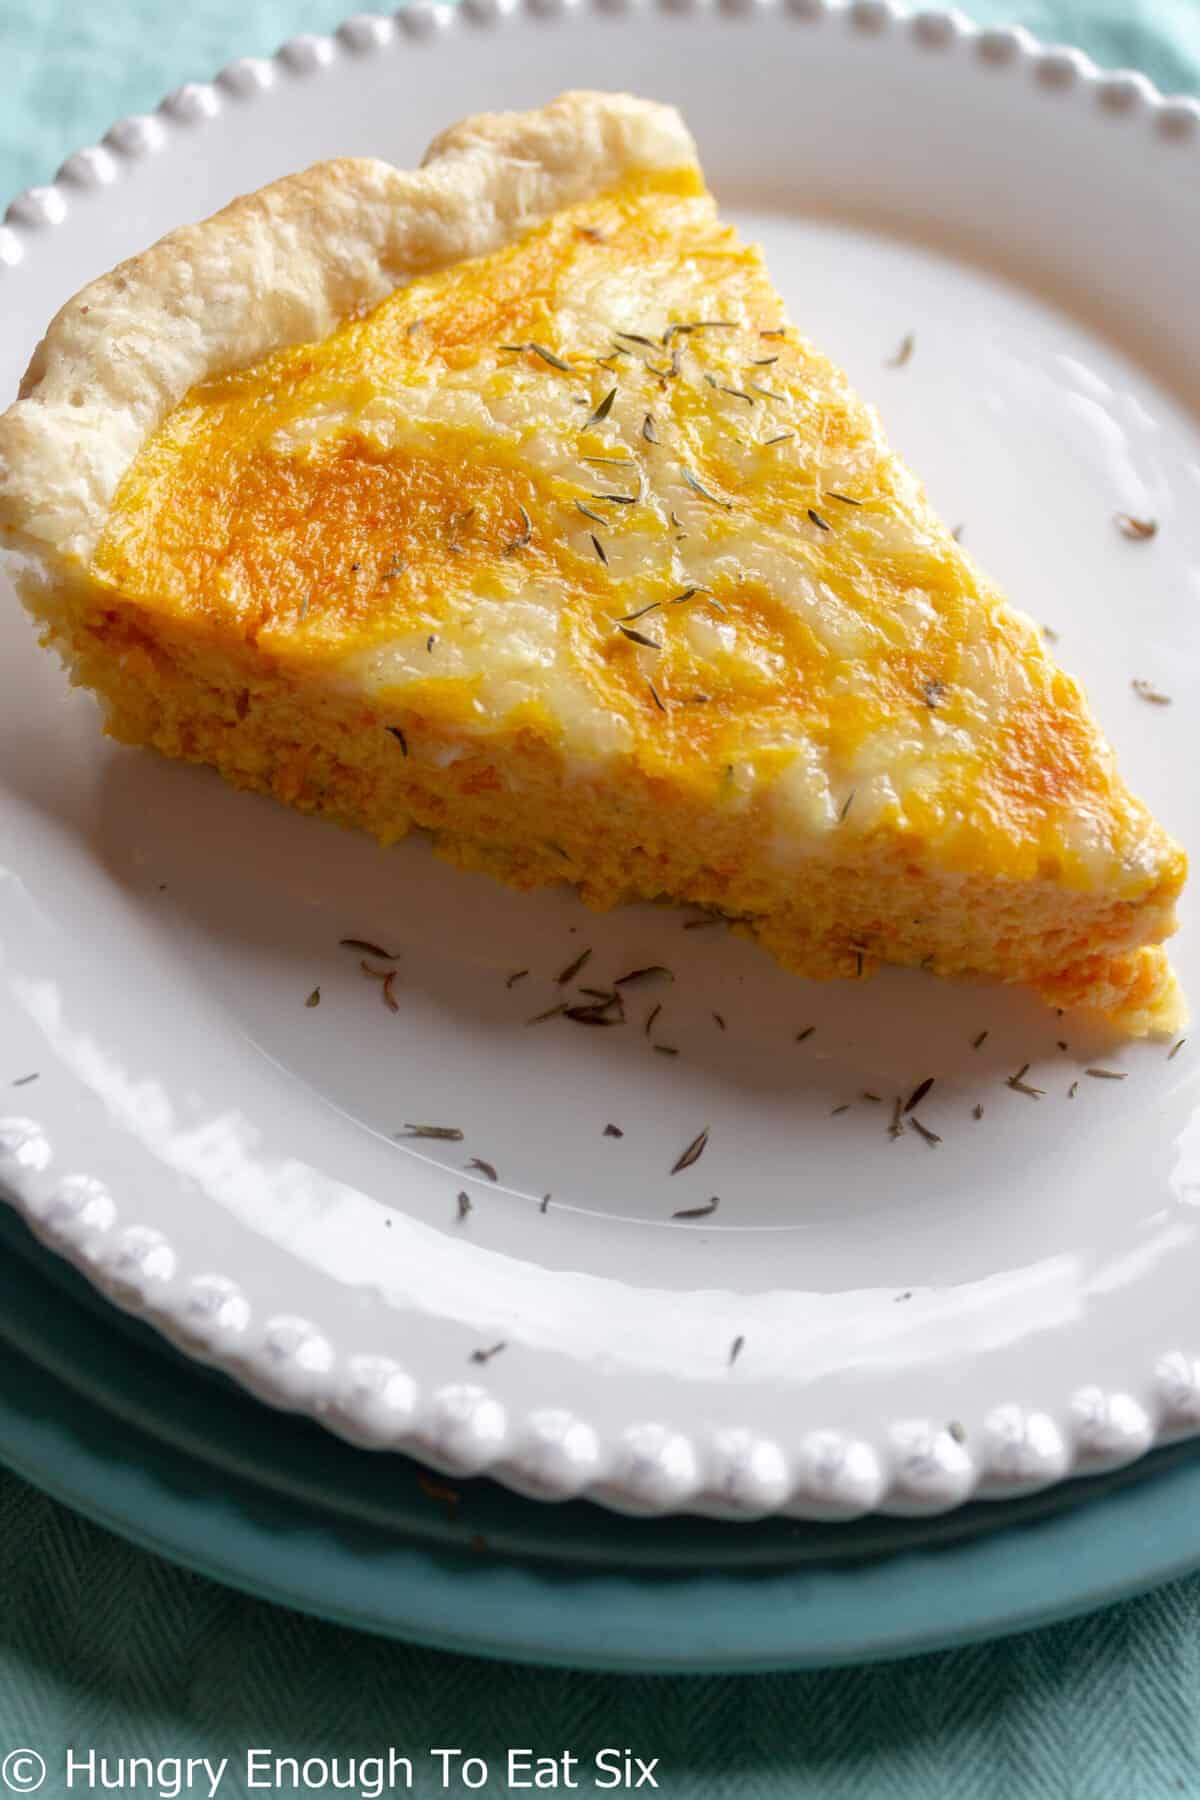 Orange-colored quiche slice made with carrots and cheese.